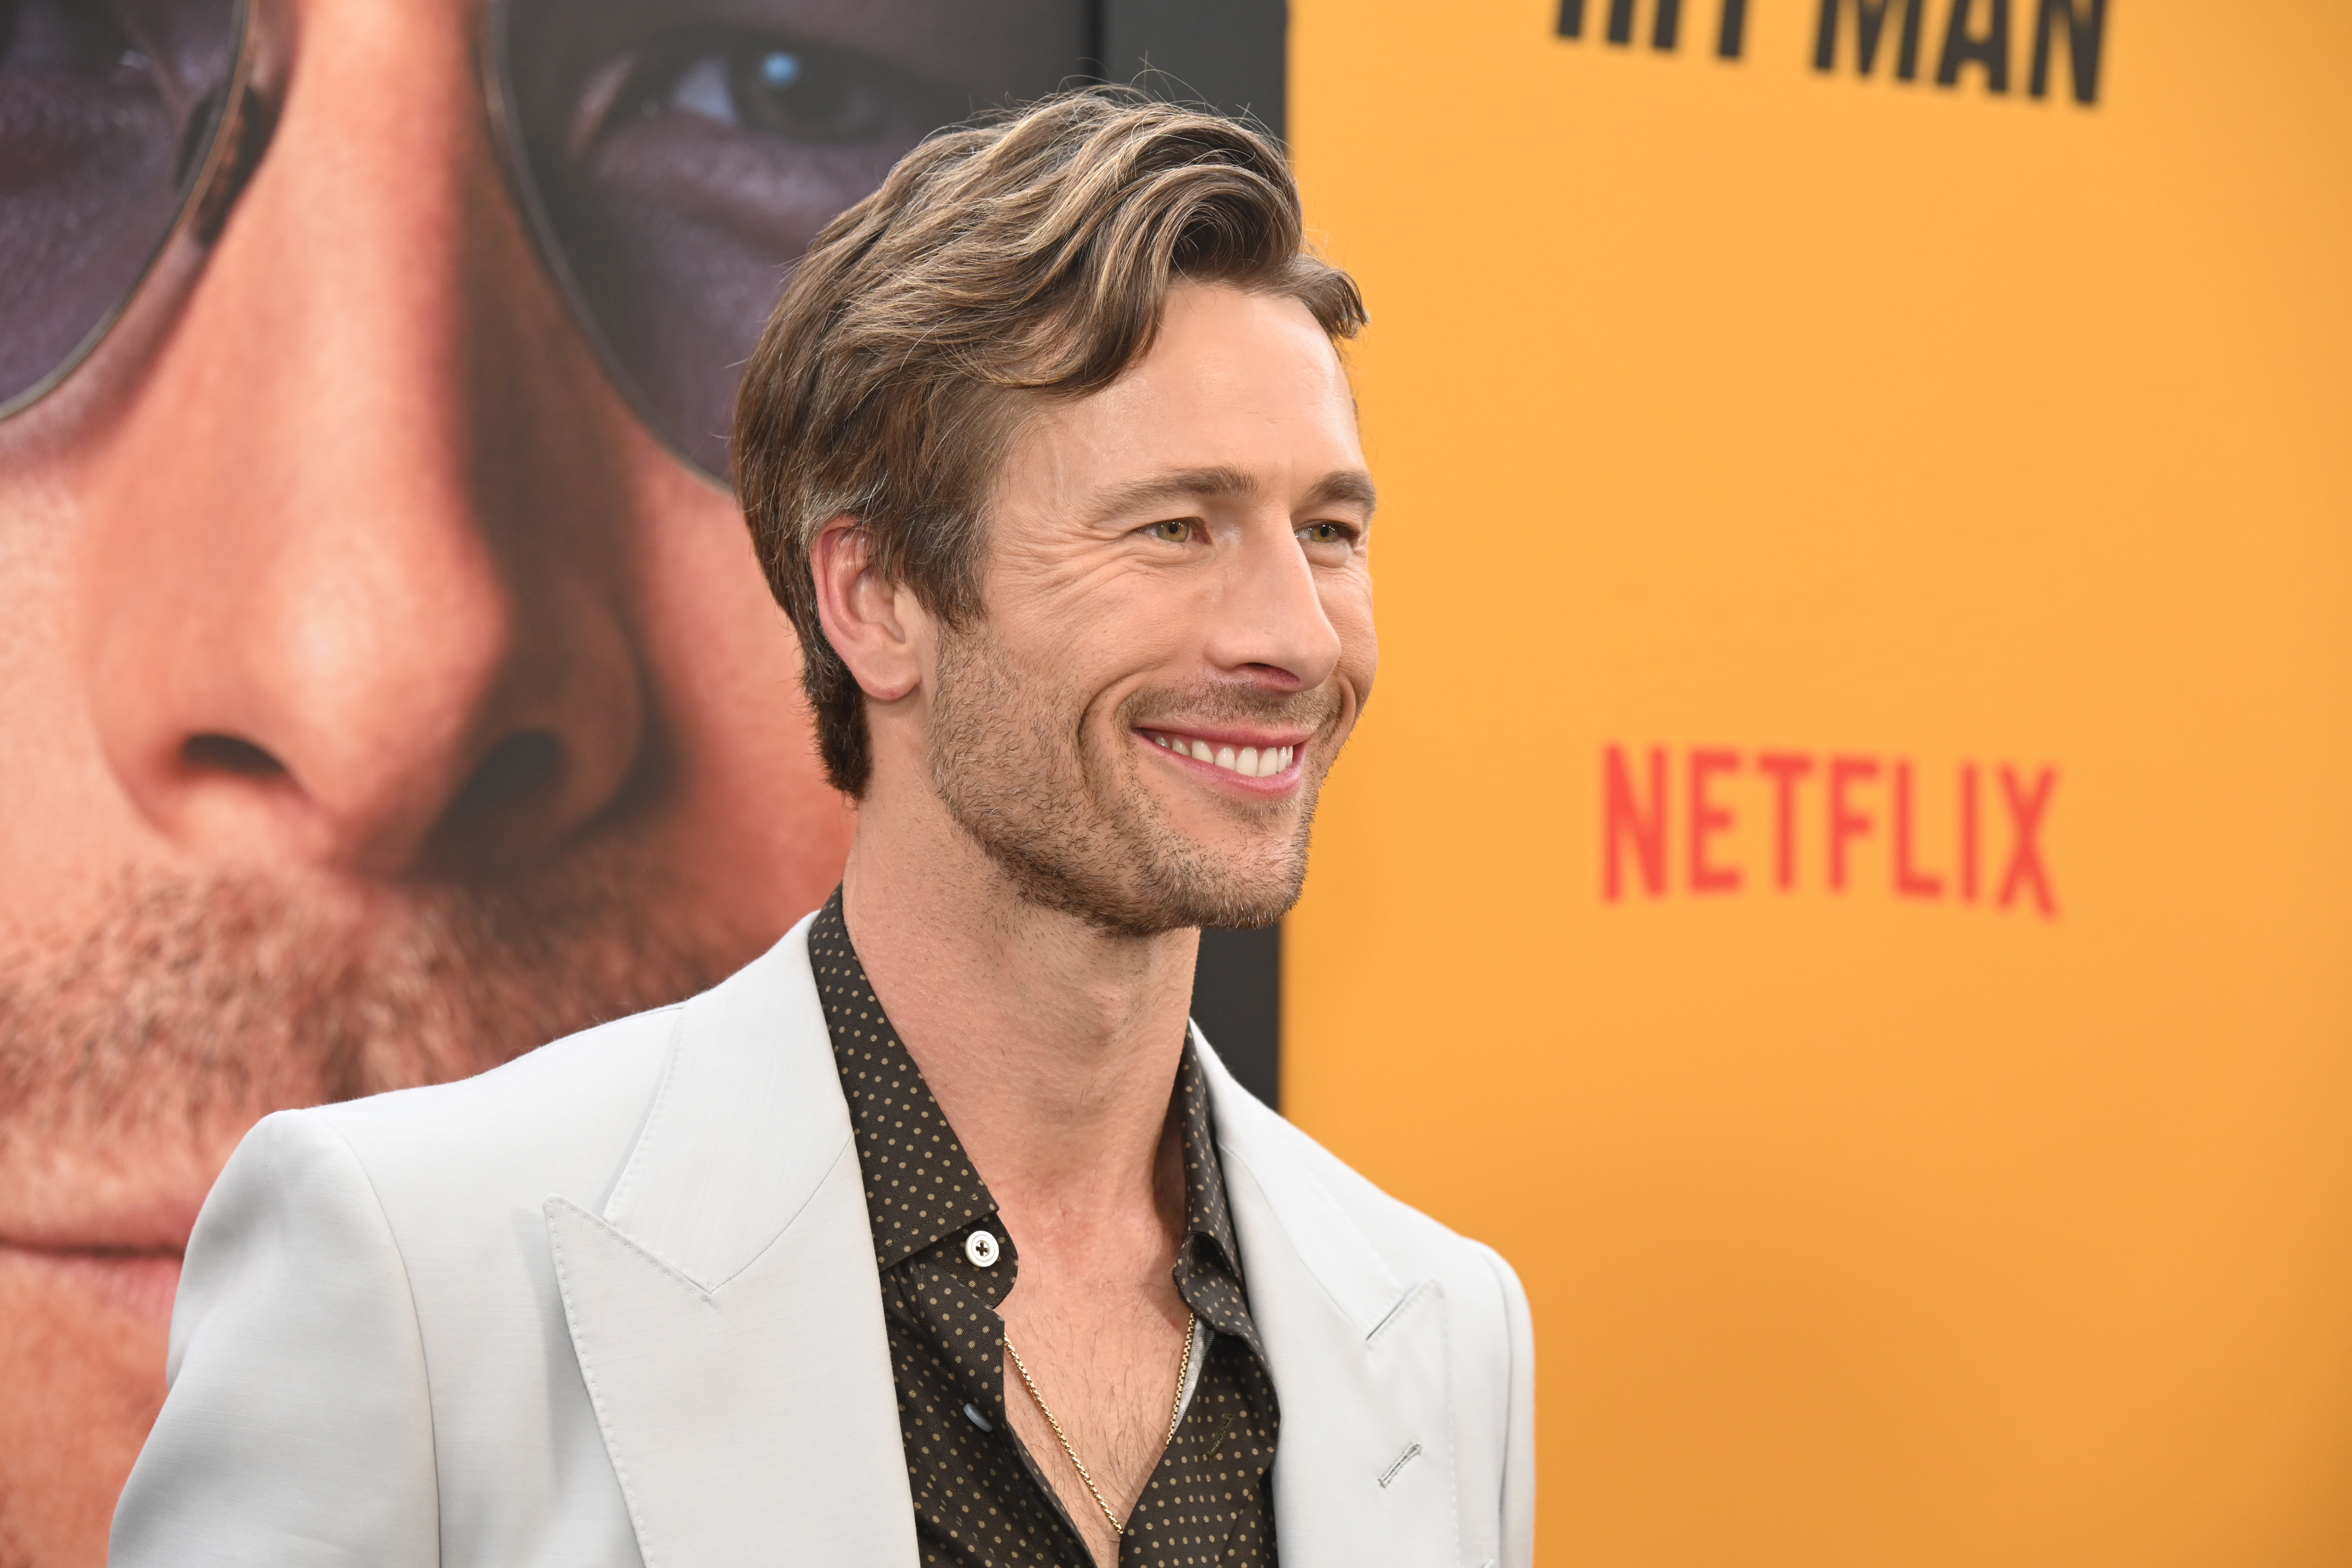 Glen Powell smiles on the red carpet, dressed in a light-colored blazer over a button-down shirt with a dotted pattern, with a poster and Netflix logo in the background